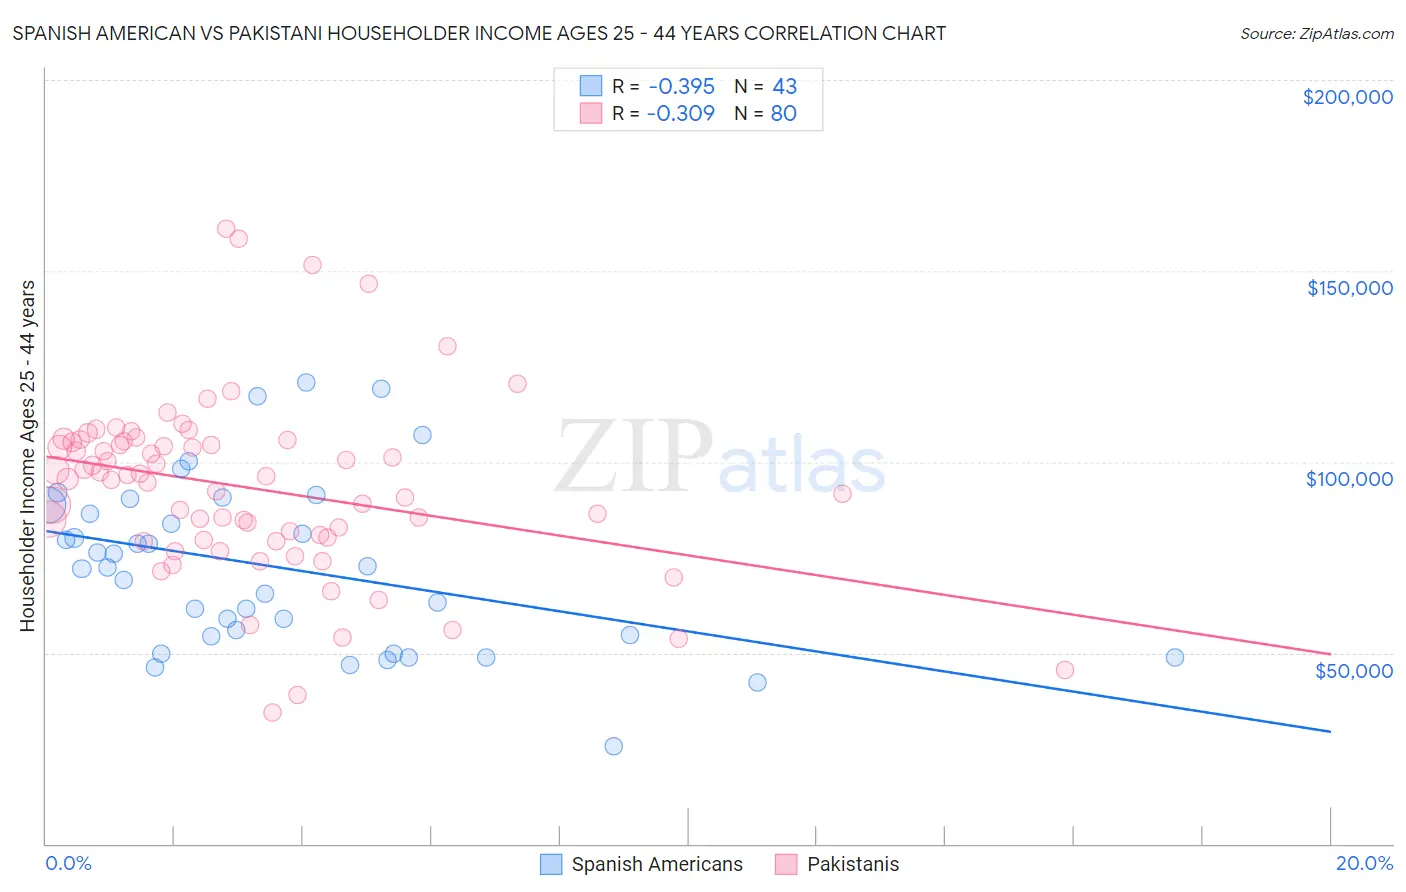 Spanish American vs Pakistani Householder Income Ages 25 - 44 years